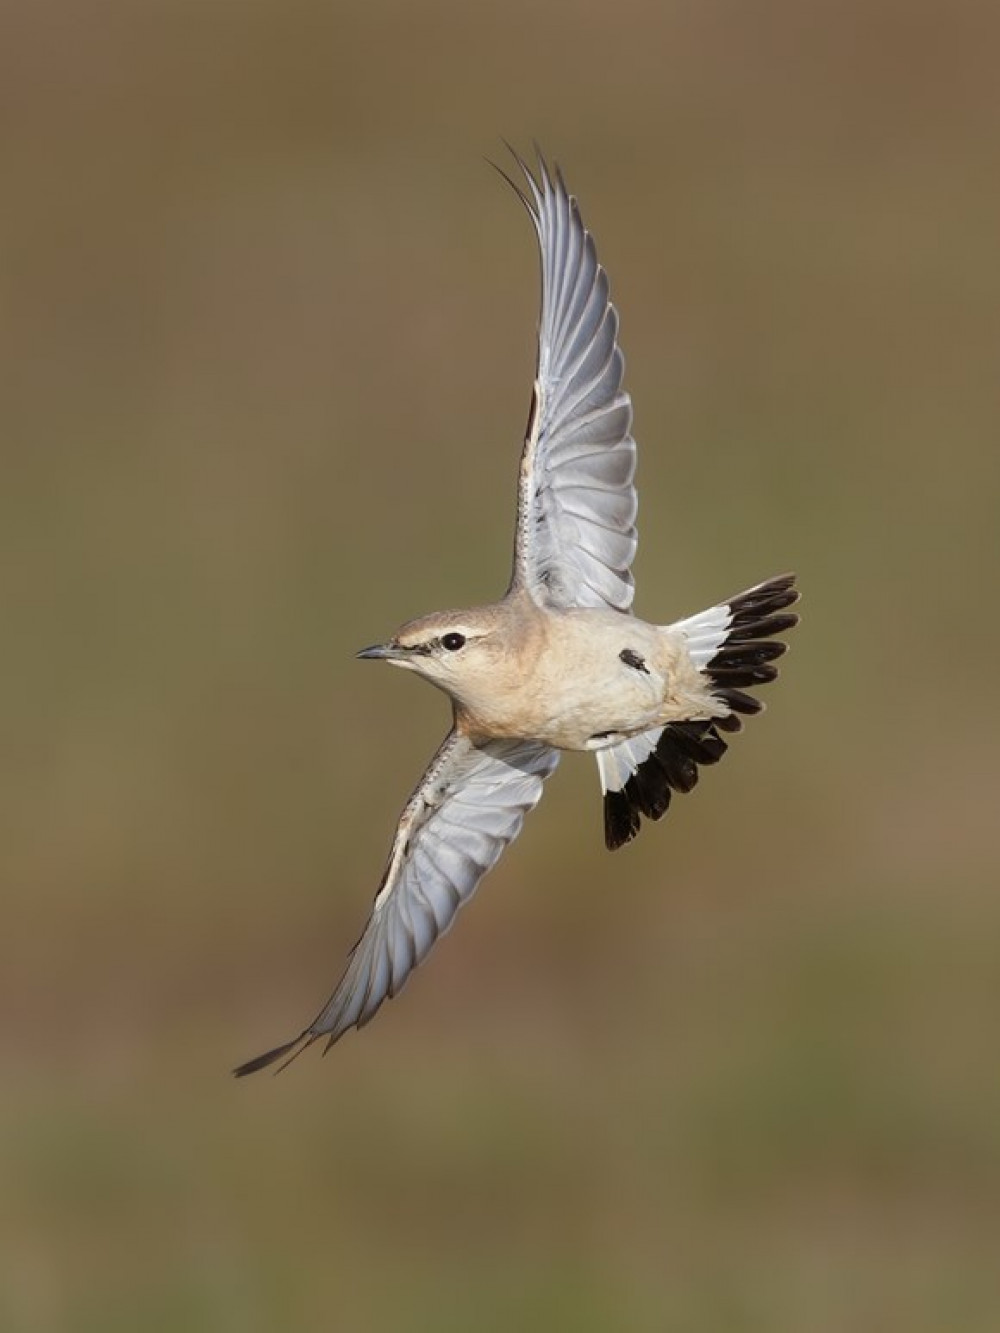 The isabelline wheatear (photo credit: Tim White)